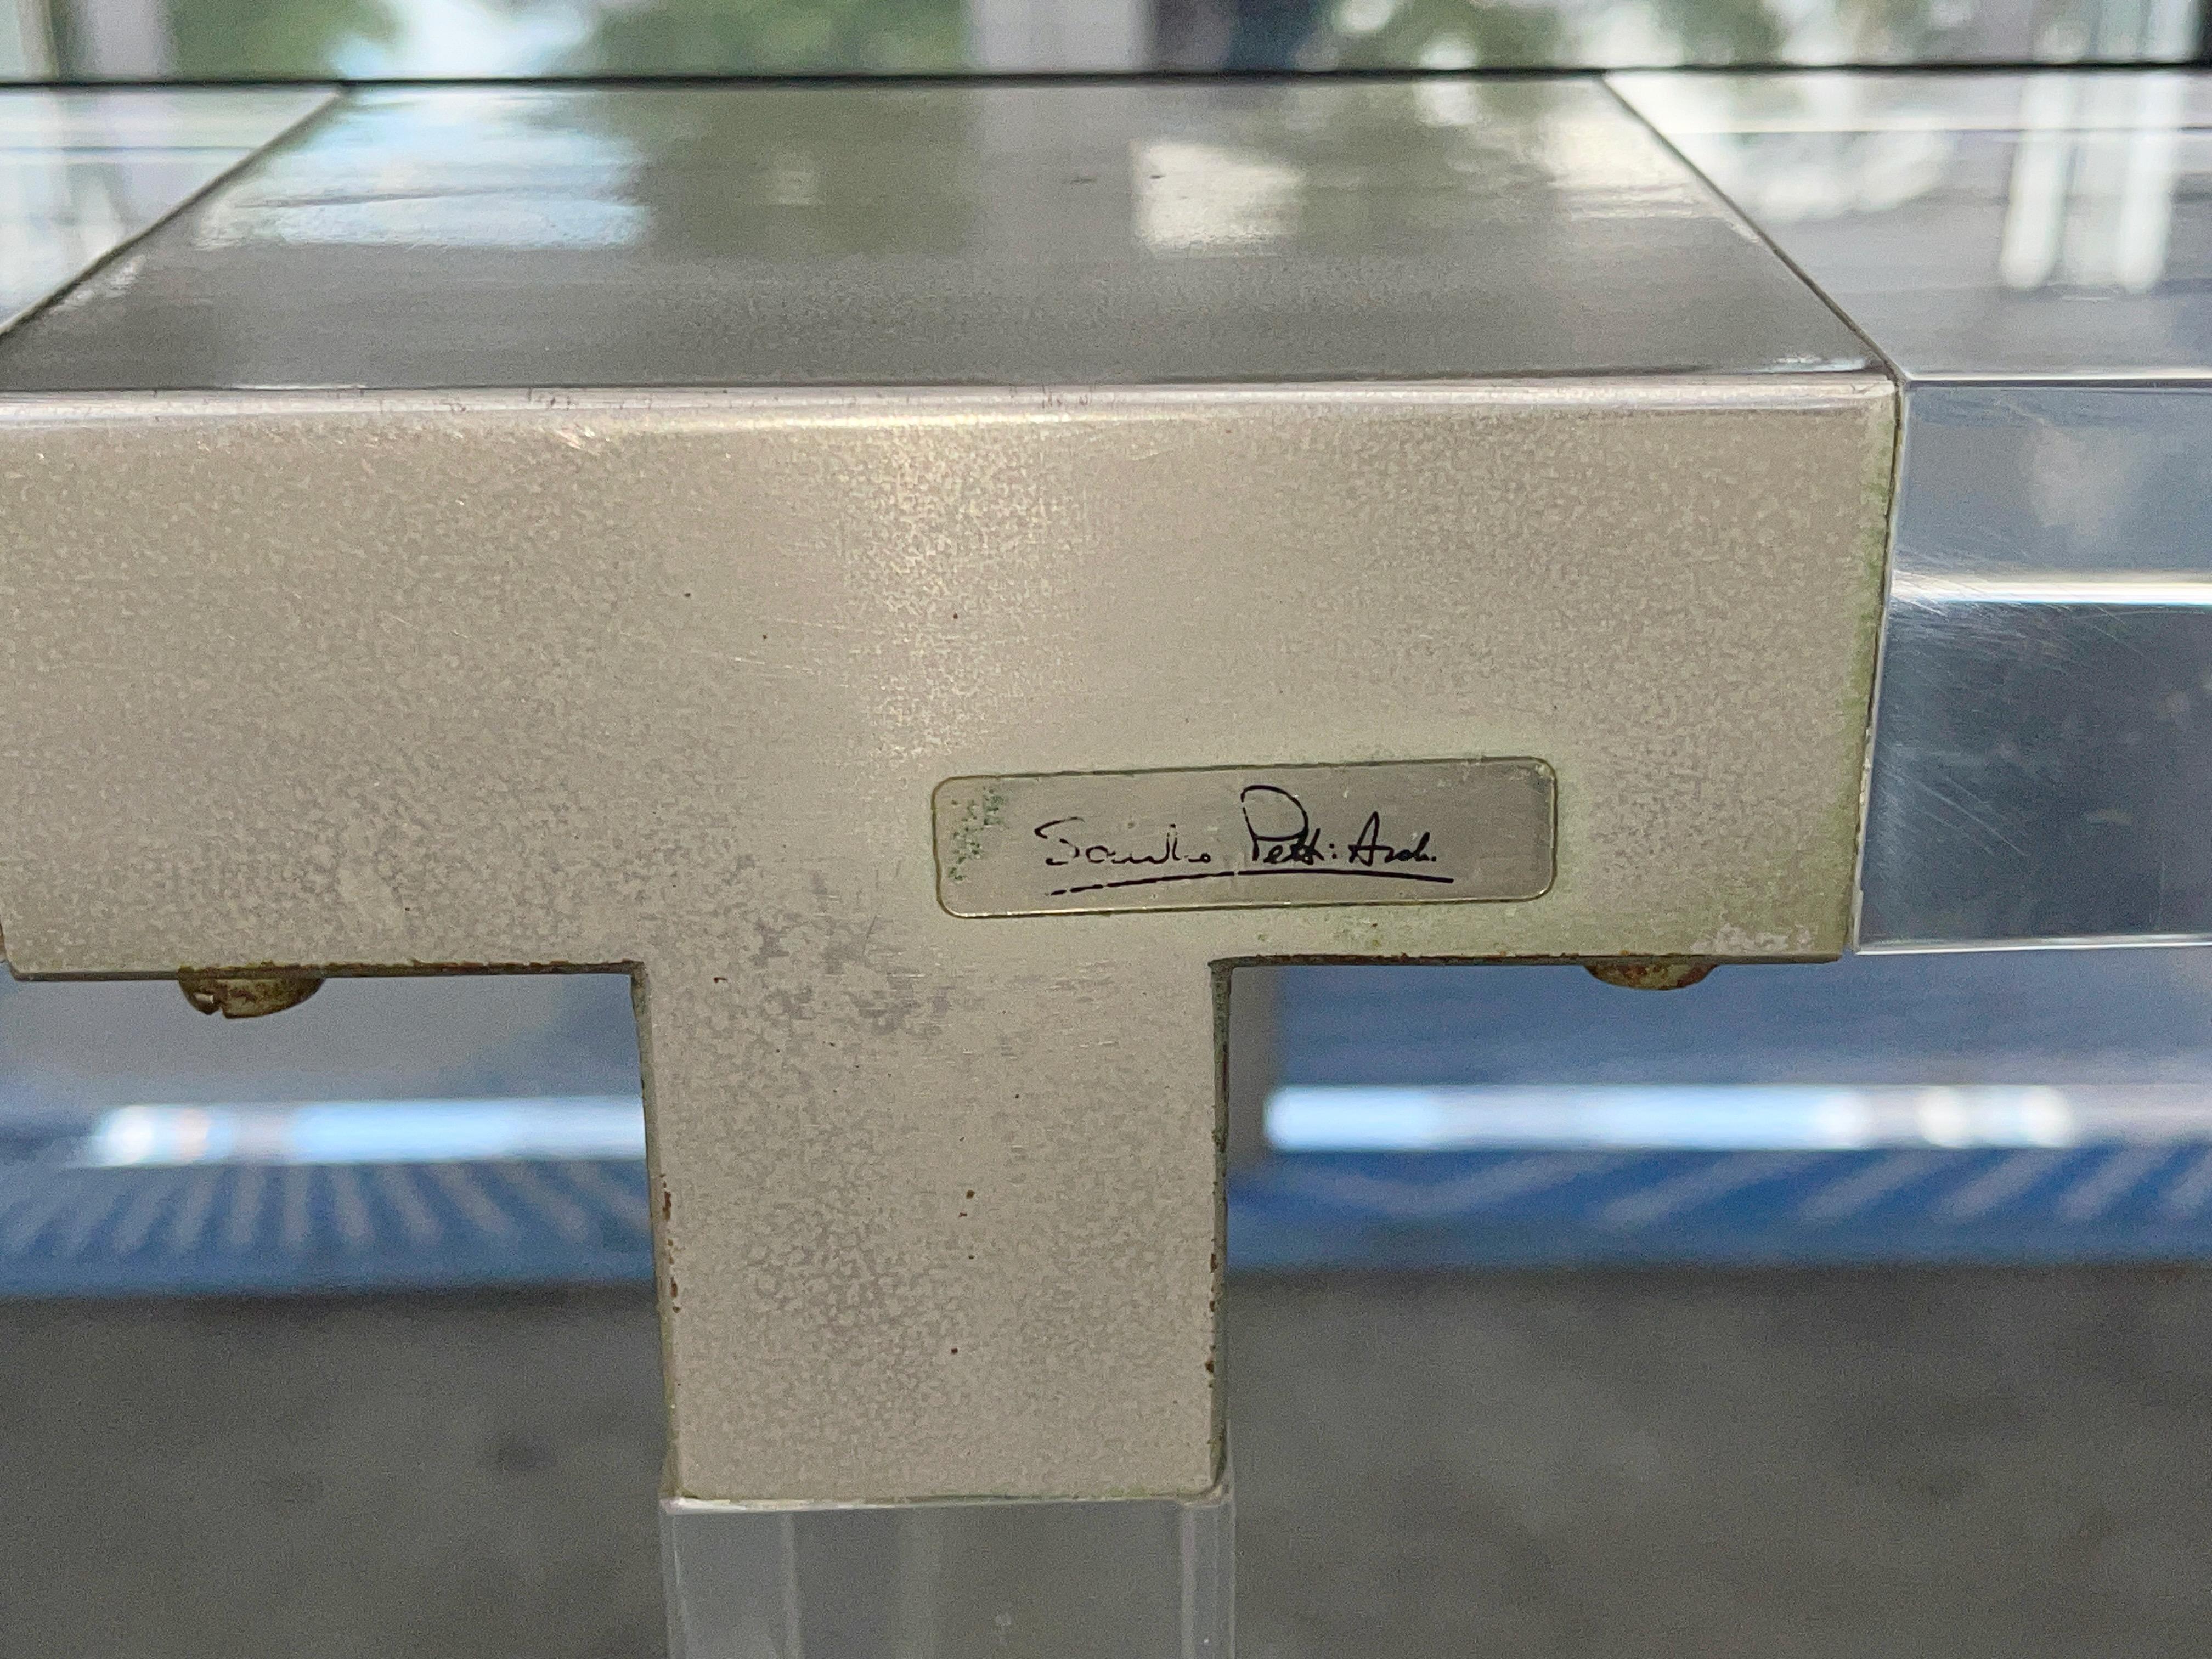 Sandro Petti, chrome mounted lucite coffee table for L'AngoloMetallArte, Roma. c. 1970s, Italy. 
Very thick acrylic. 
Four matte chrome steel connector brackets around top edge of table with Sandro Petti signed metal tag. 
Polished chrome connector